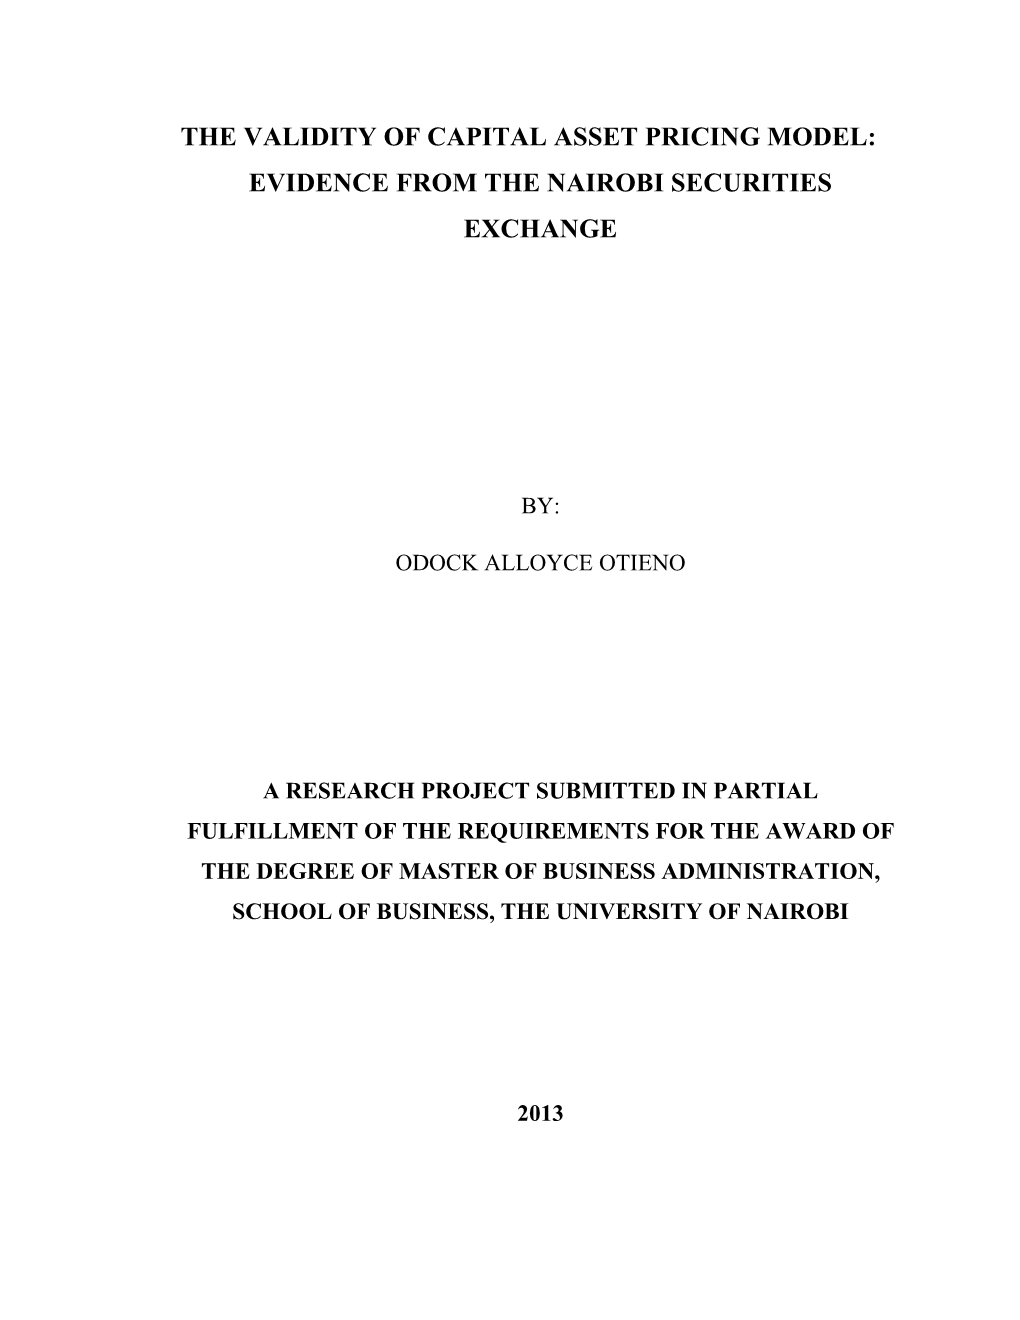 The Validity of Capital Asset Pricing Model: Evidence from the Nairobi Securities Exchange